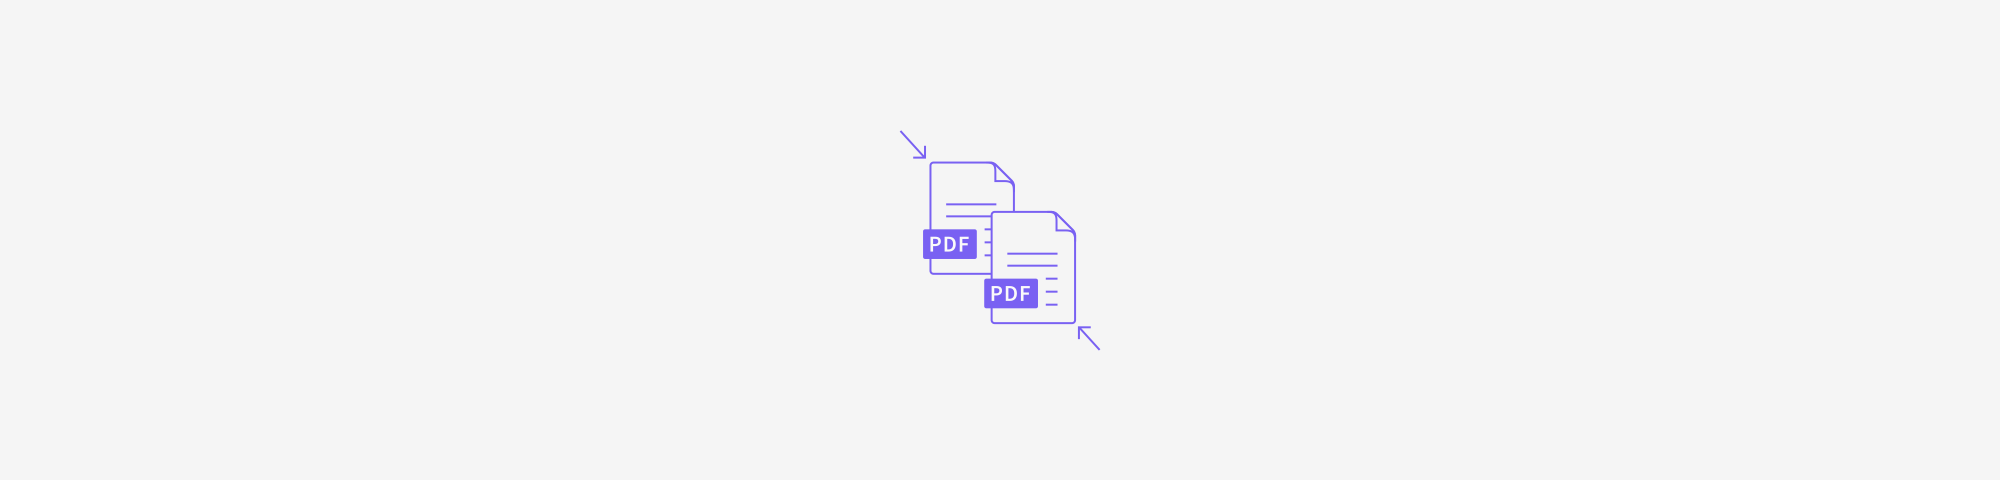 blog-banner: how-to-combine-multiple-pdf-files-into-one-document@2x